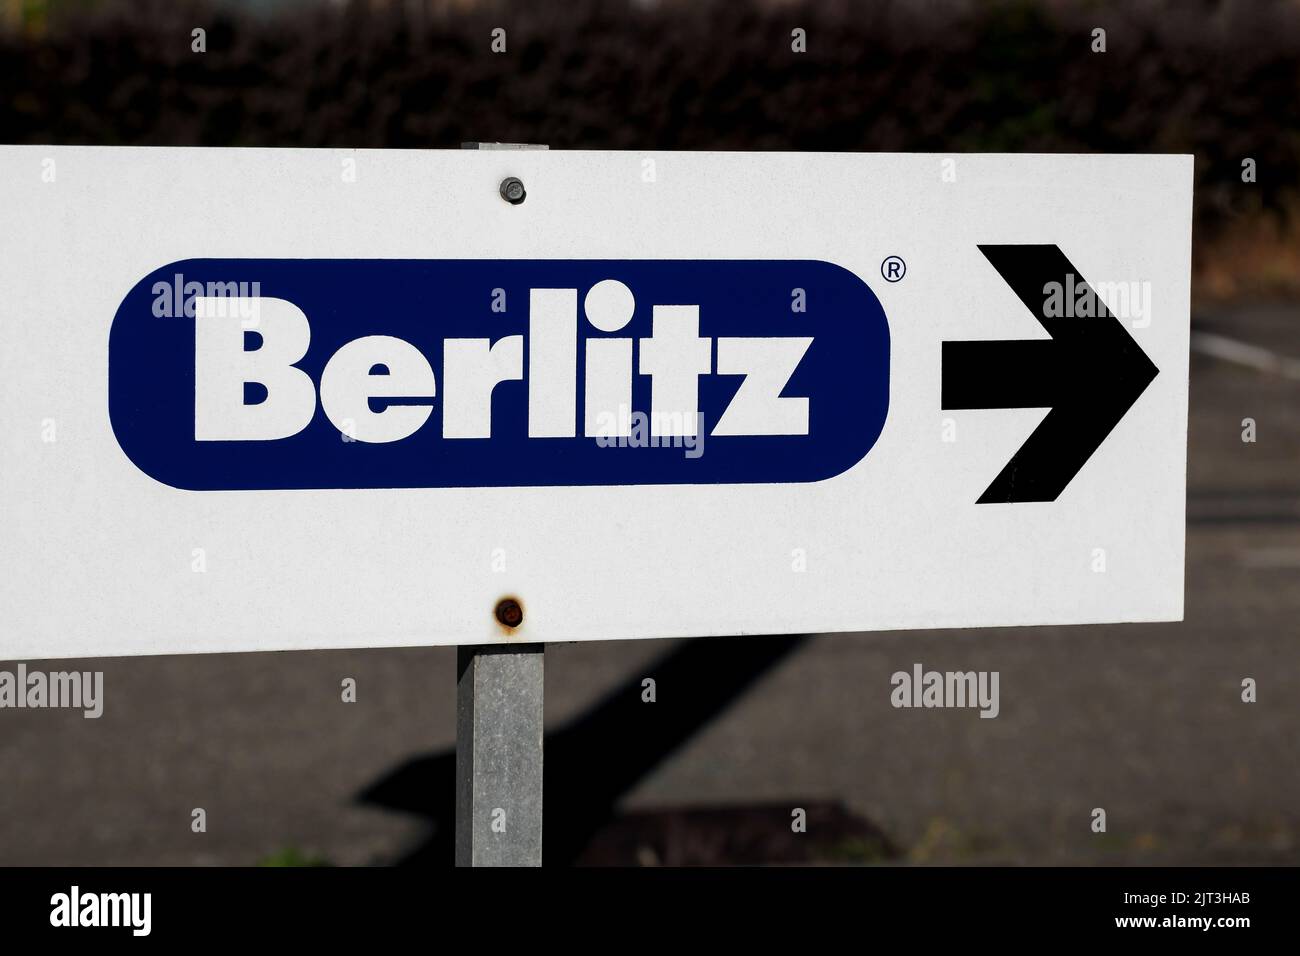 Champagne, France - June 13, 2021: Berlitz logo on a signpost. Berlitz Corporation is a global leadership training and language education company Stock Photo